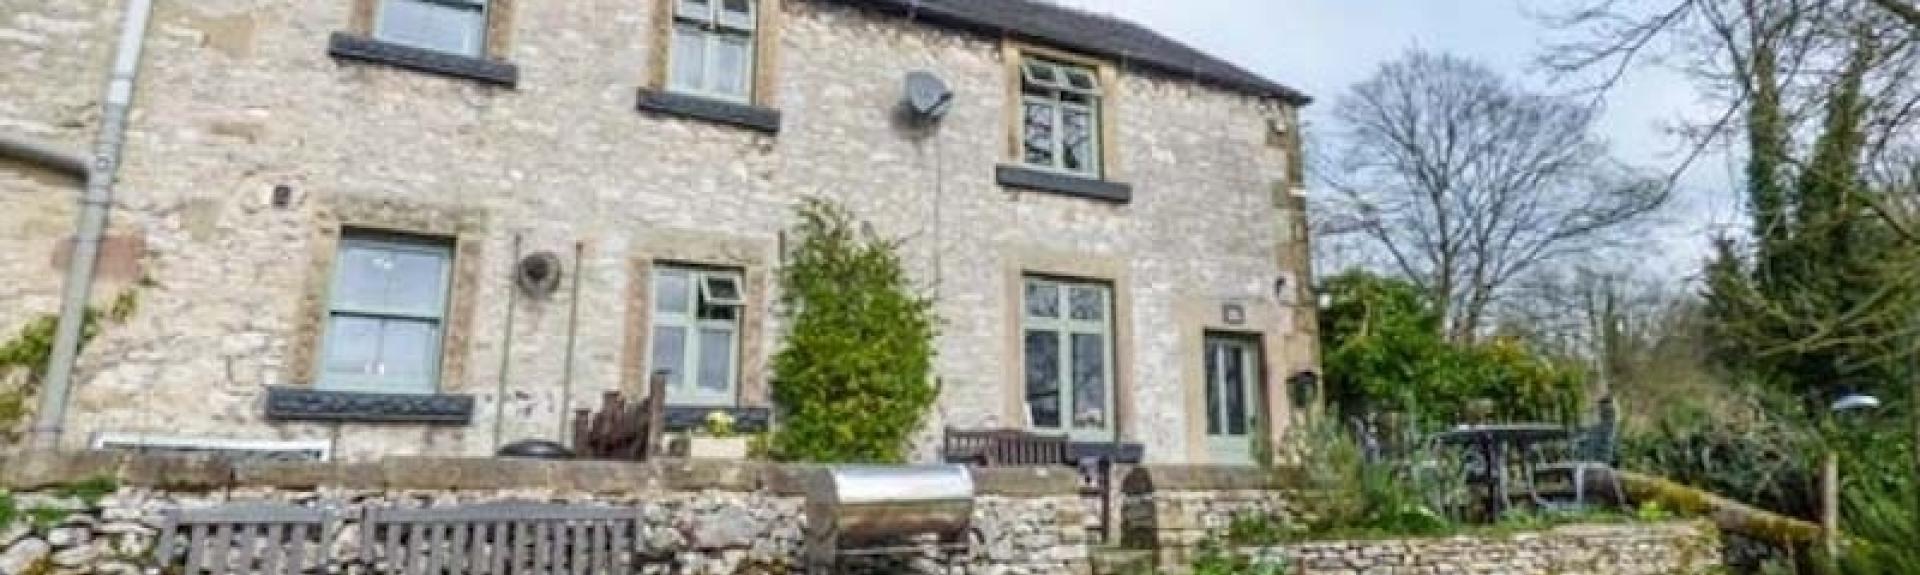 Large stone-built rural cottage exterior with a spacious lawn.